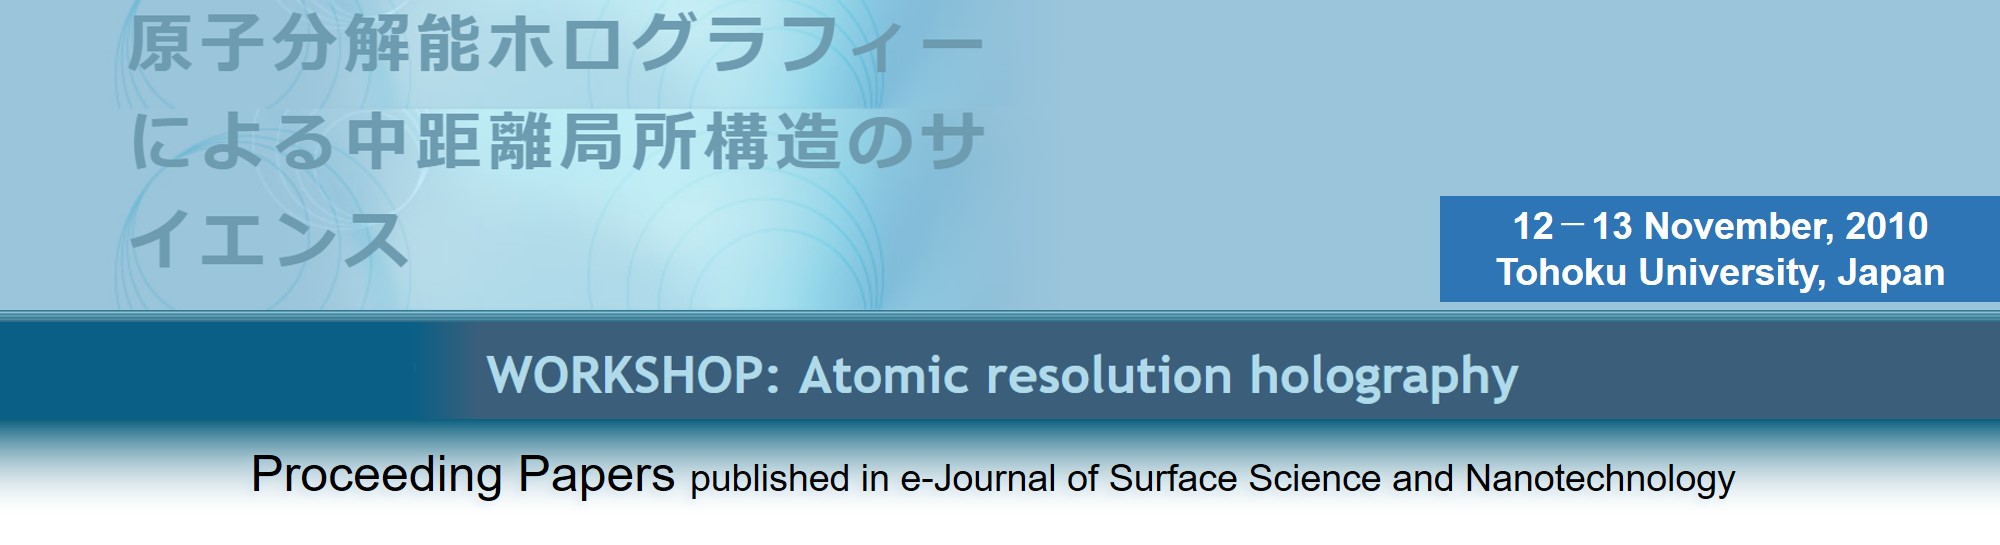 Atomic Resolution Holography